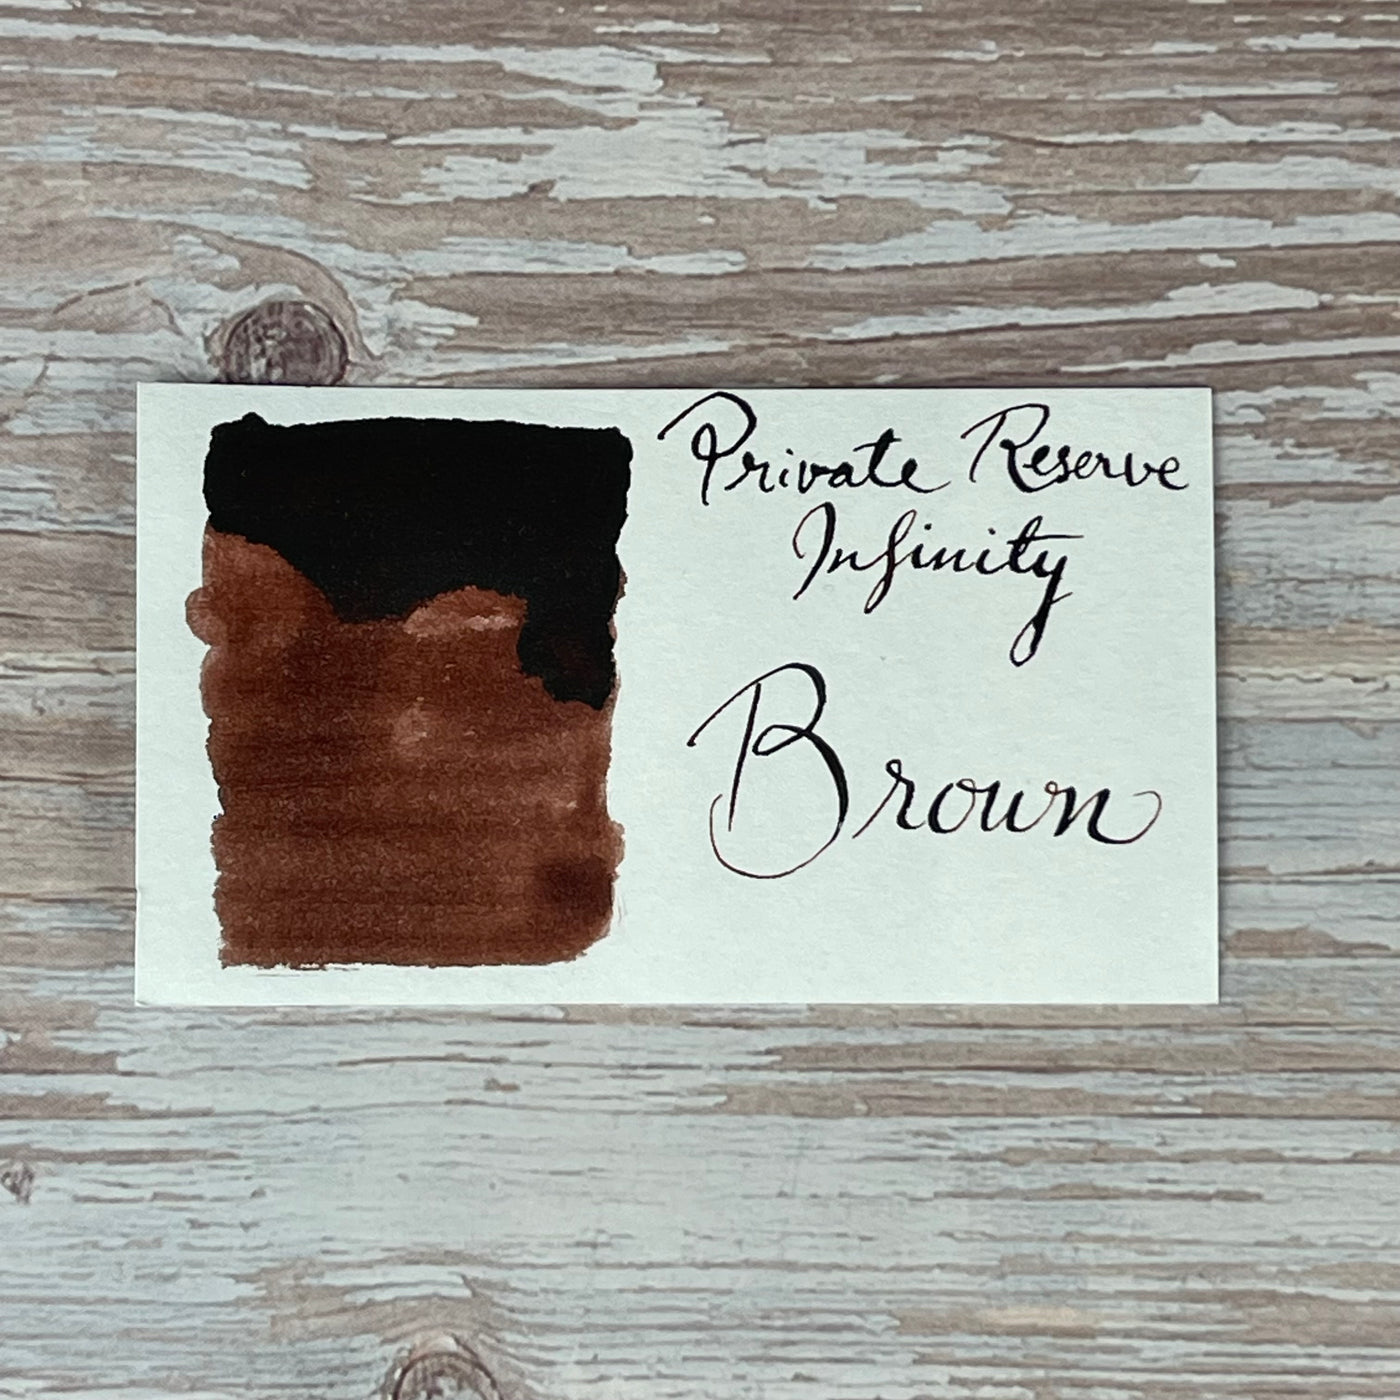 Private Reserve Infinity Brown - 30ml Bottled Ink